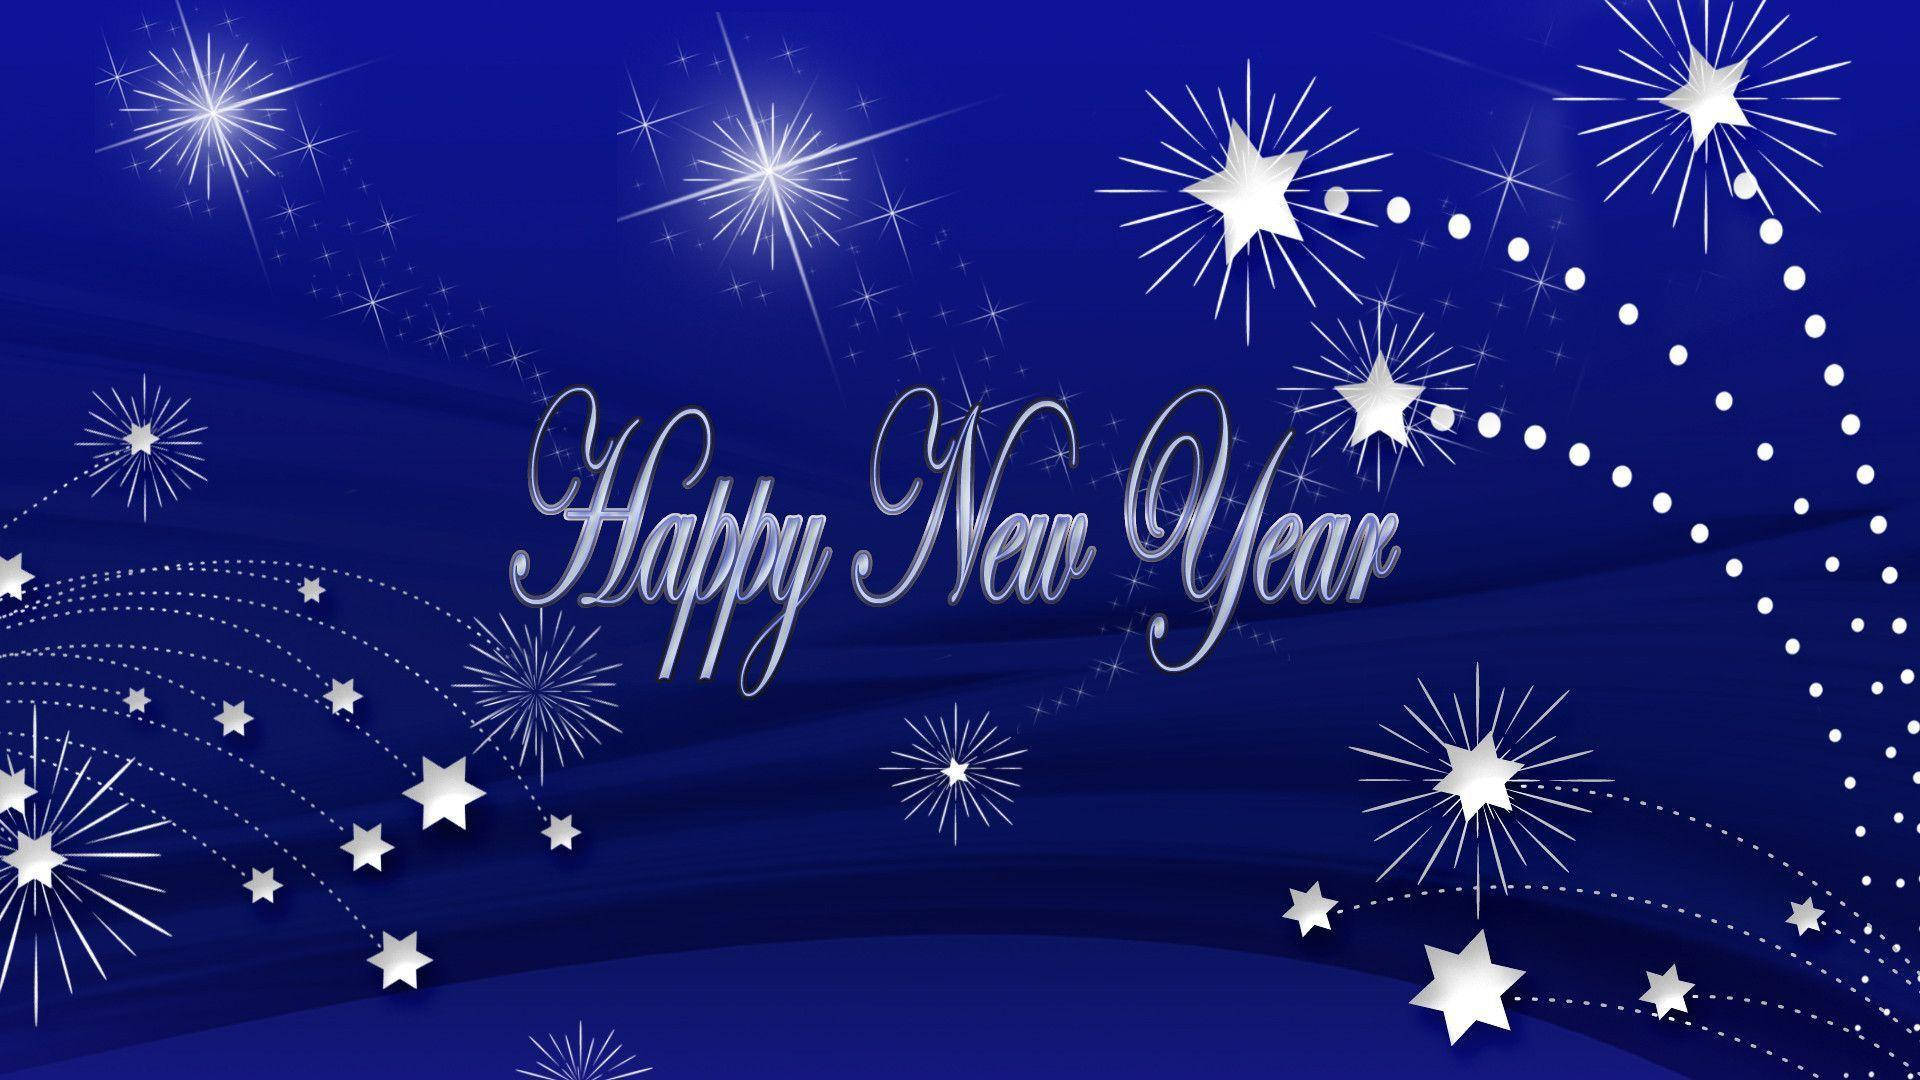 Wishing You A Sparkling New Year And Bright Happy Future Wallpaper